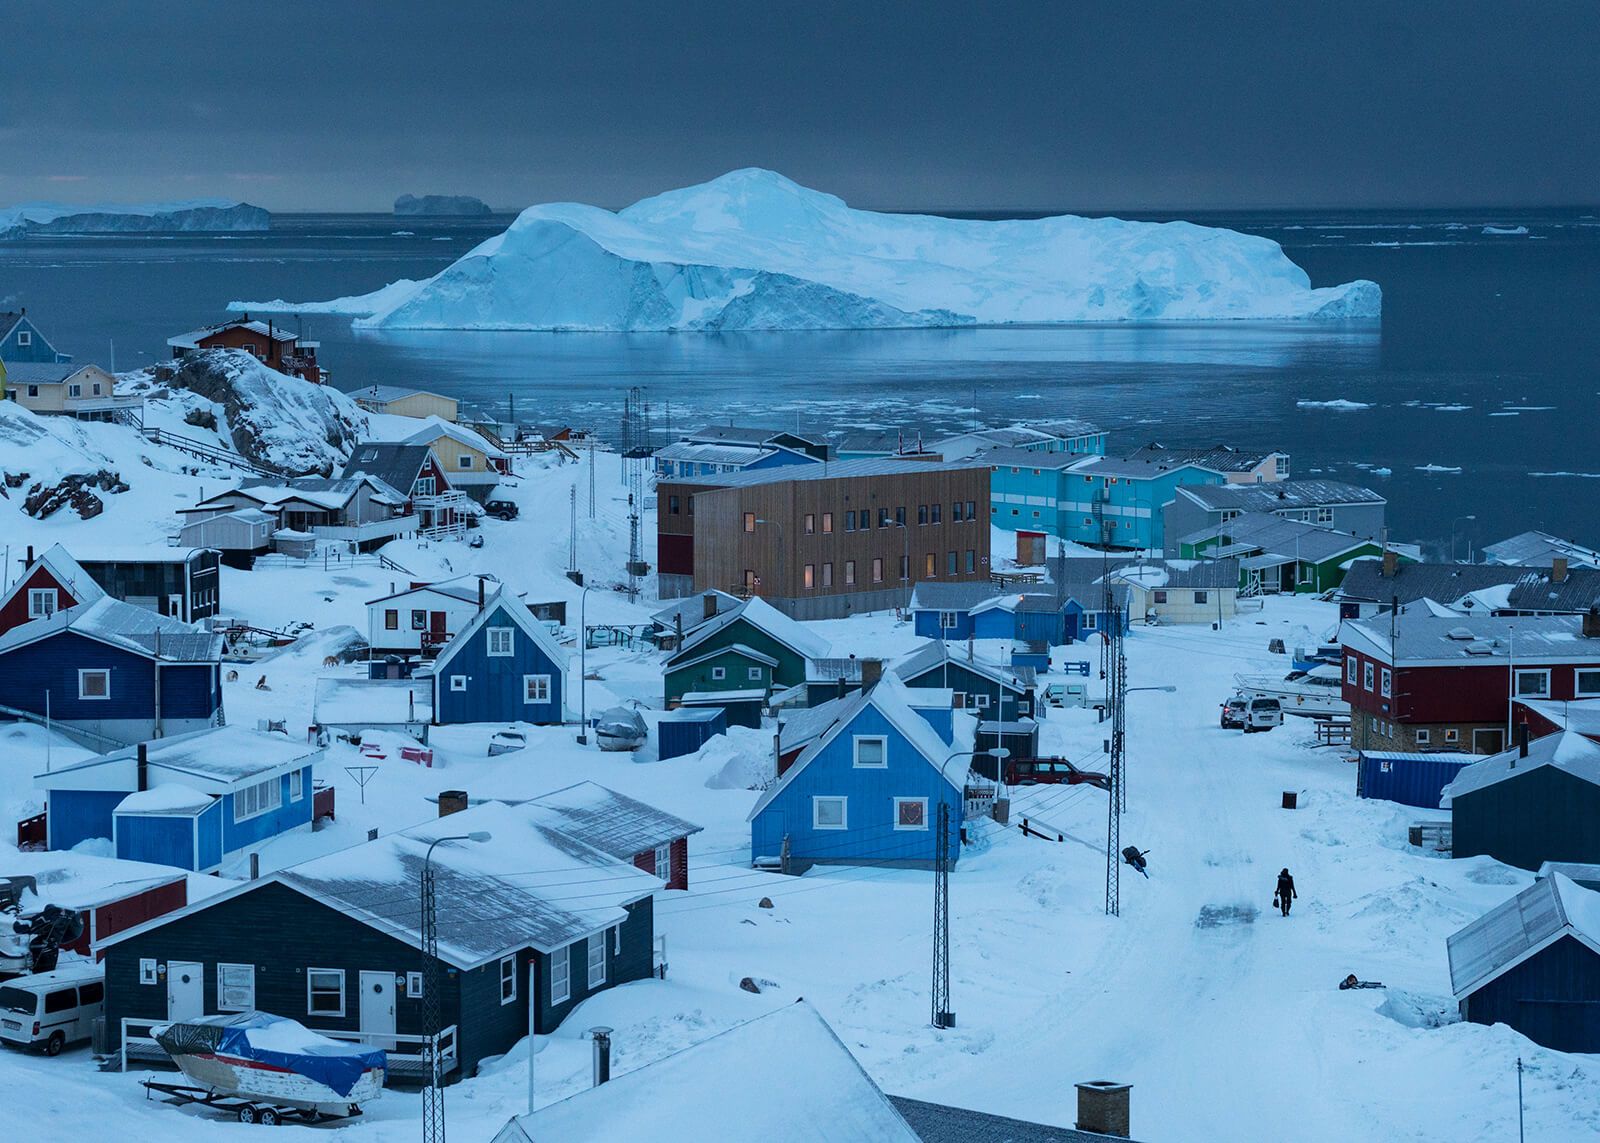 The town of Ilulissat, Greenland's third largest, with a population of 4,400. Image by Jonas Bendiksen/Magnum Photos. Greenland, 2018.